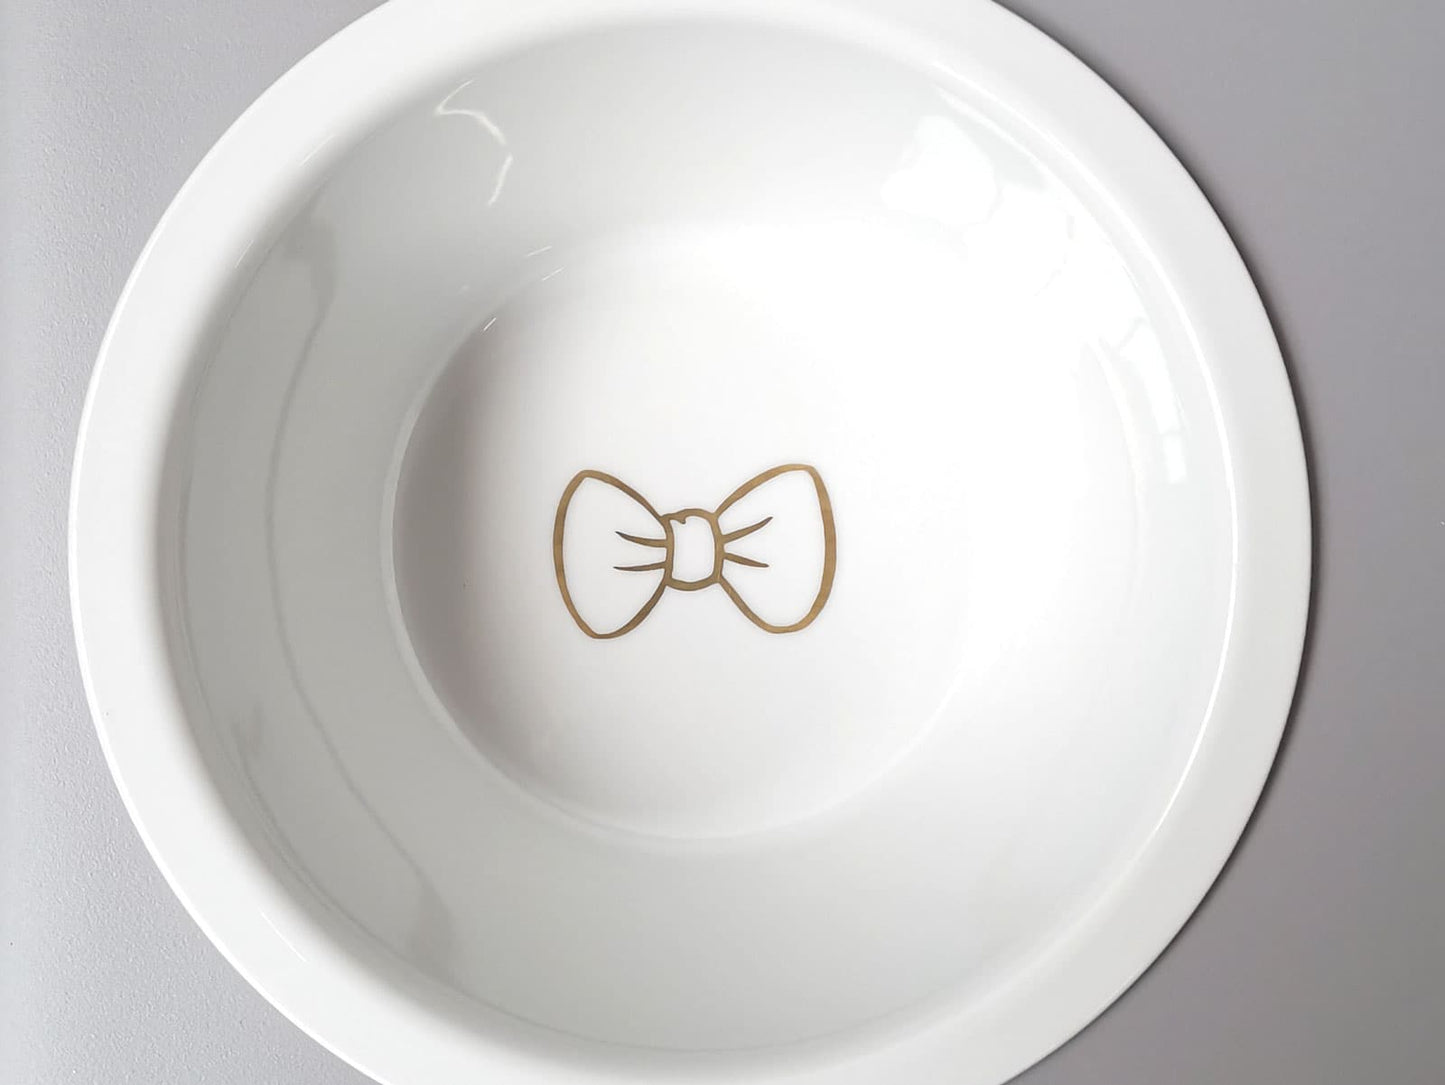 Additional charge for personalization for a dogBar® S or S-large porcelain bowl